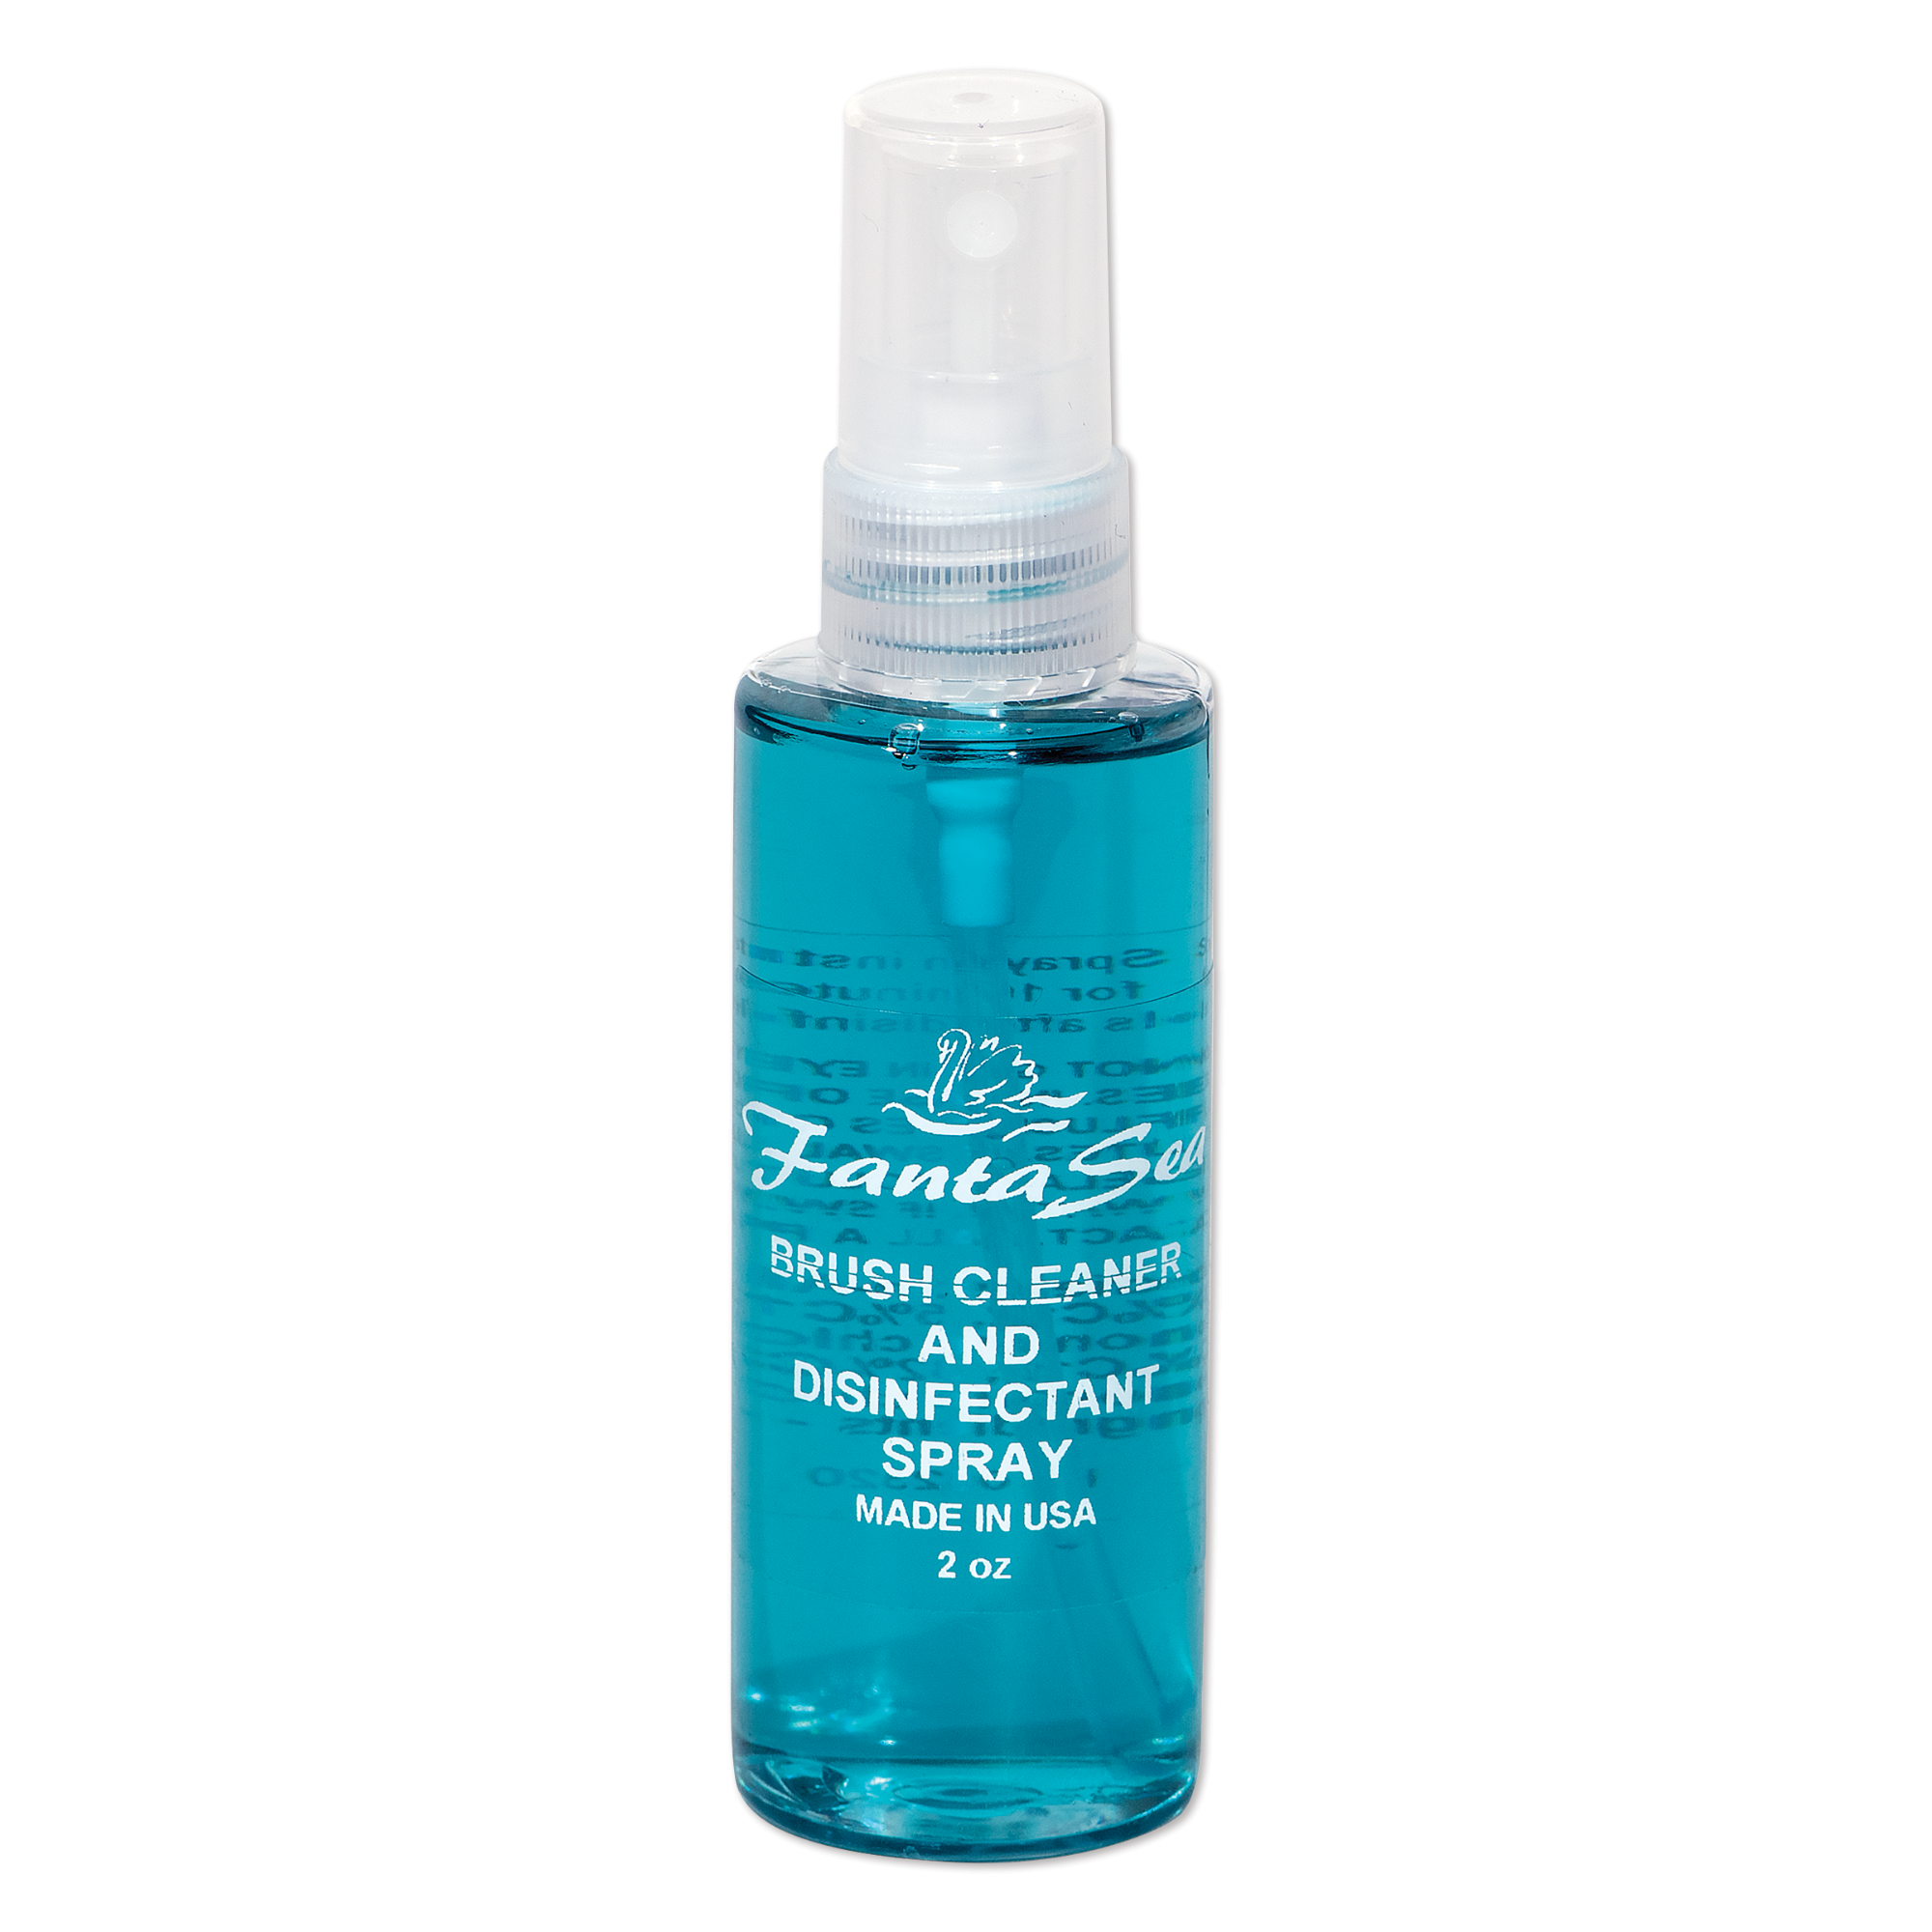 Makeup Brush Cleaner and Disinfectant Spray - 2 oz.